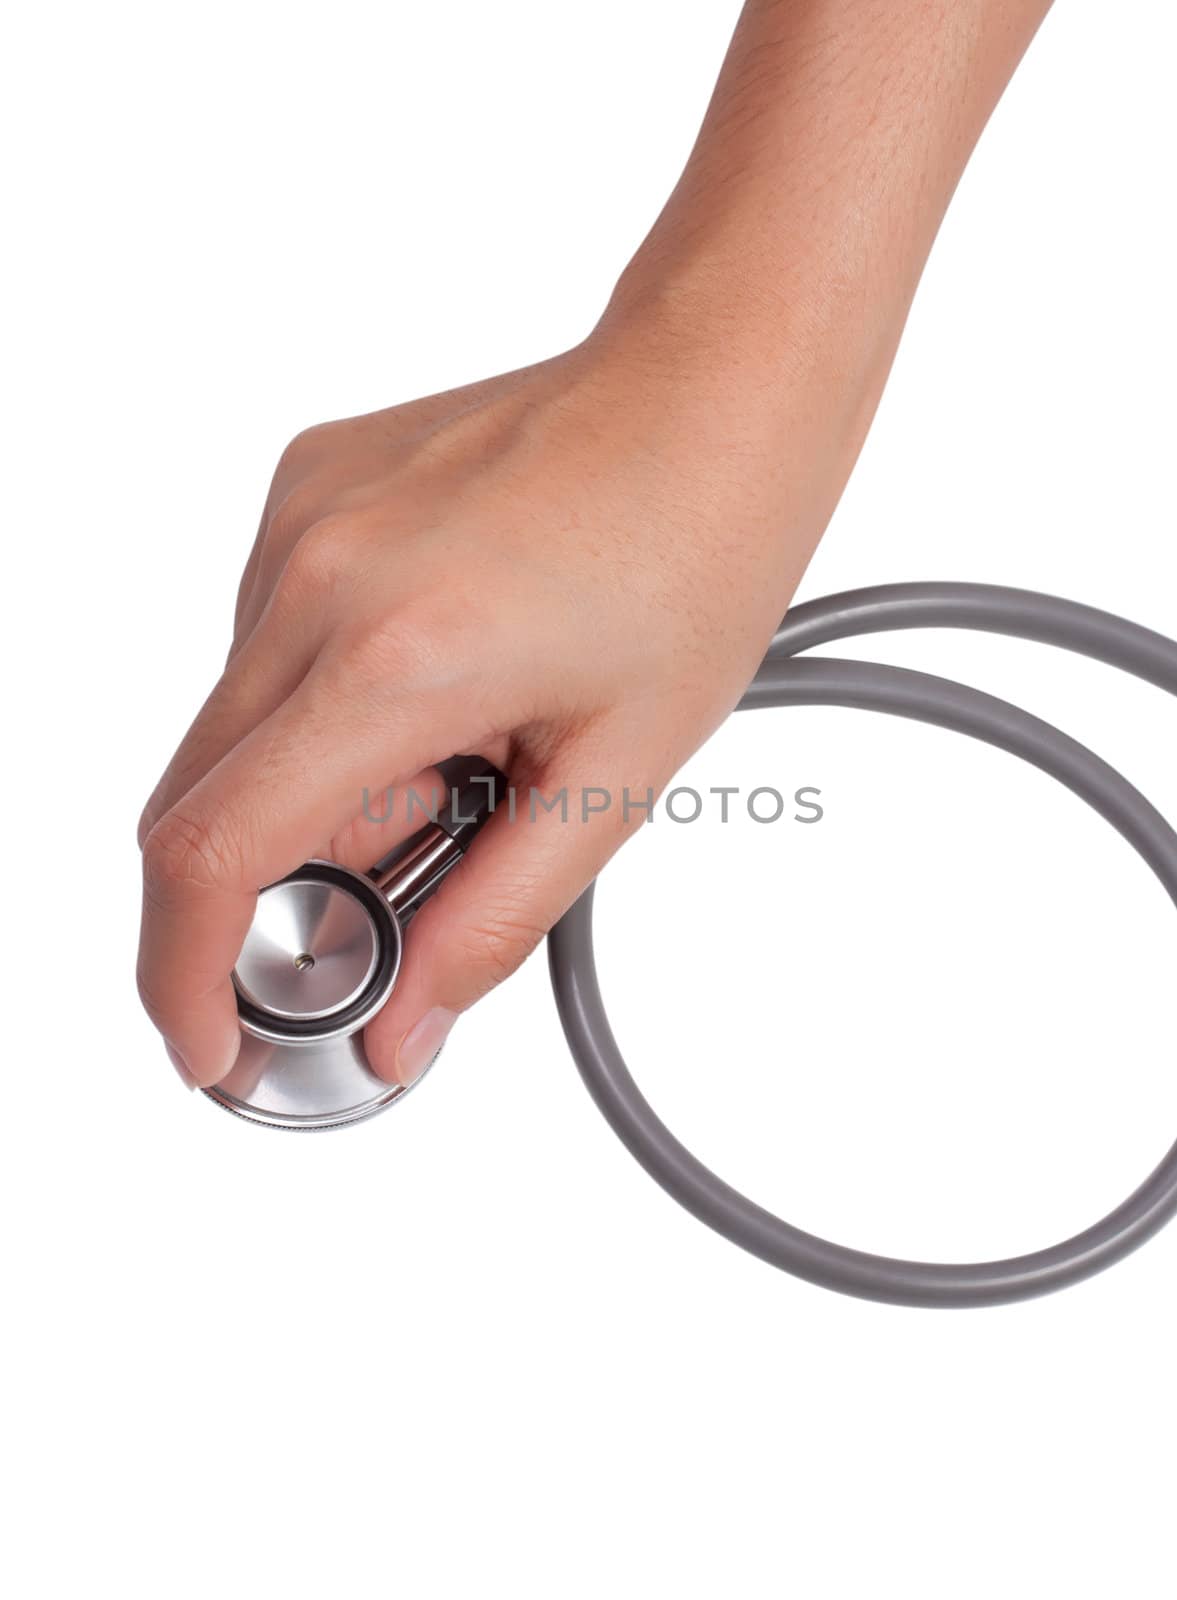 Female hand holding stethoscope; health care concept by Suriyaphoto